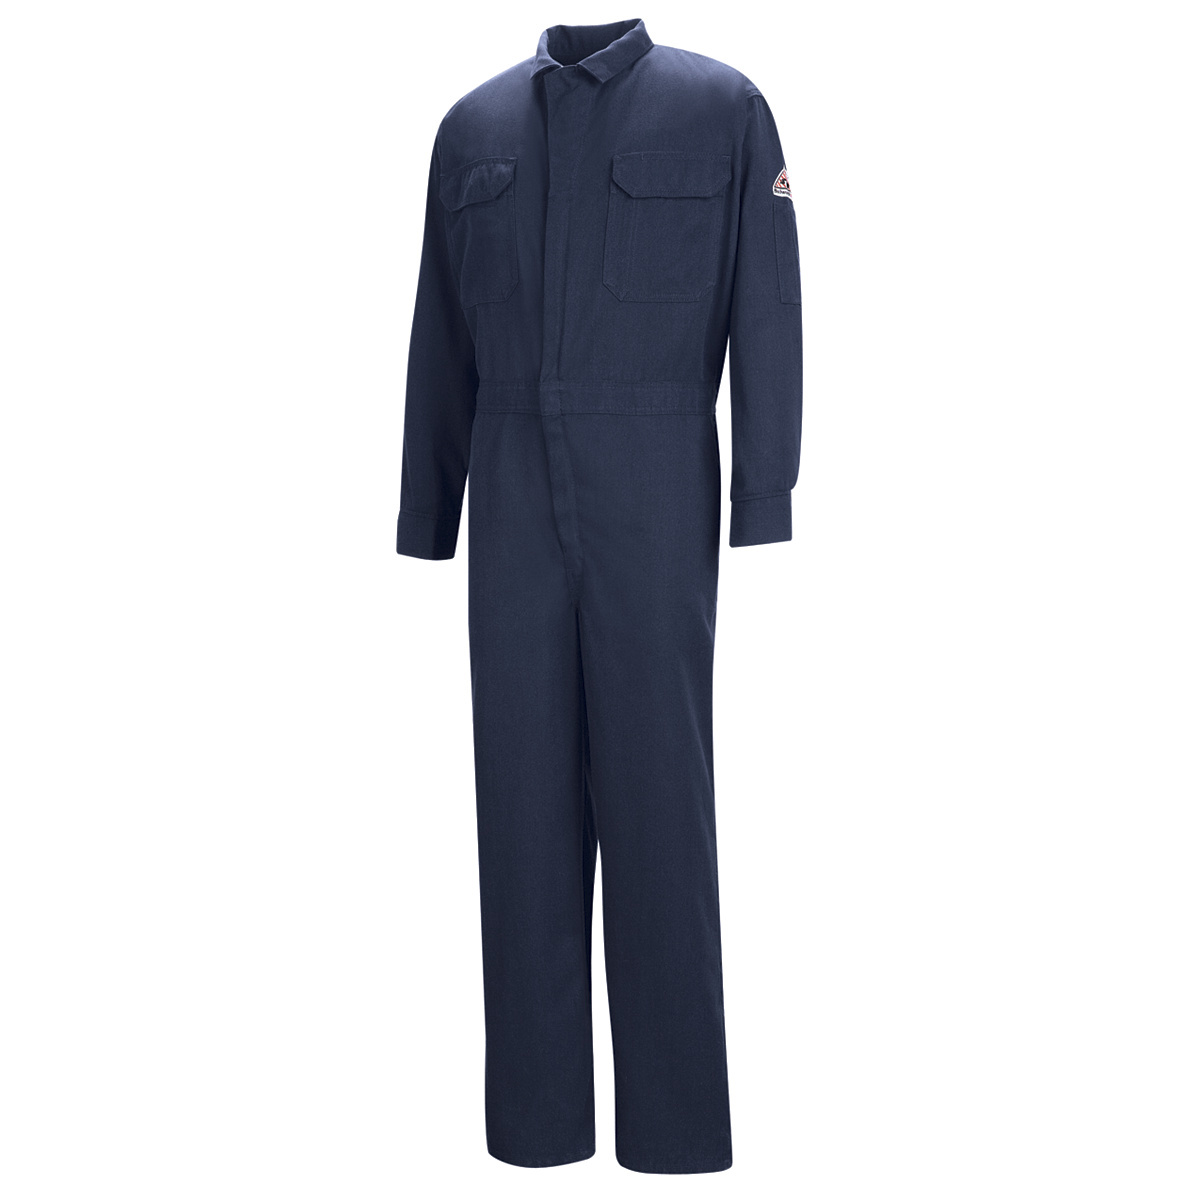 Bulwark® 44 Tall Navy Blue Modacrylic/Lyocell/Aramid Water Repellent Flame Resistant Coveralls With Zipper Front Closure